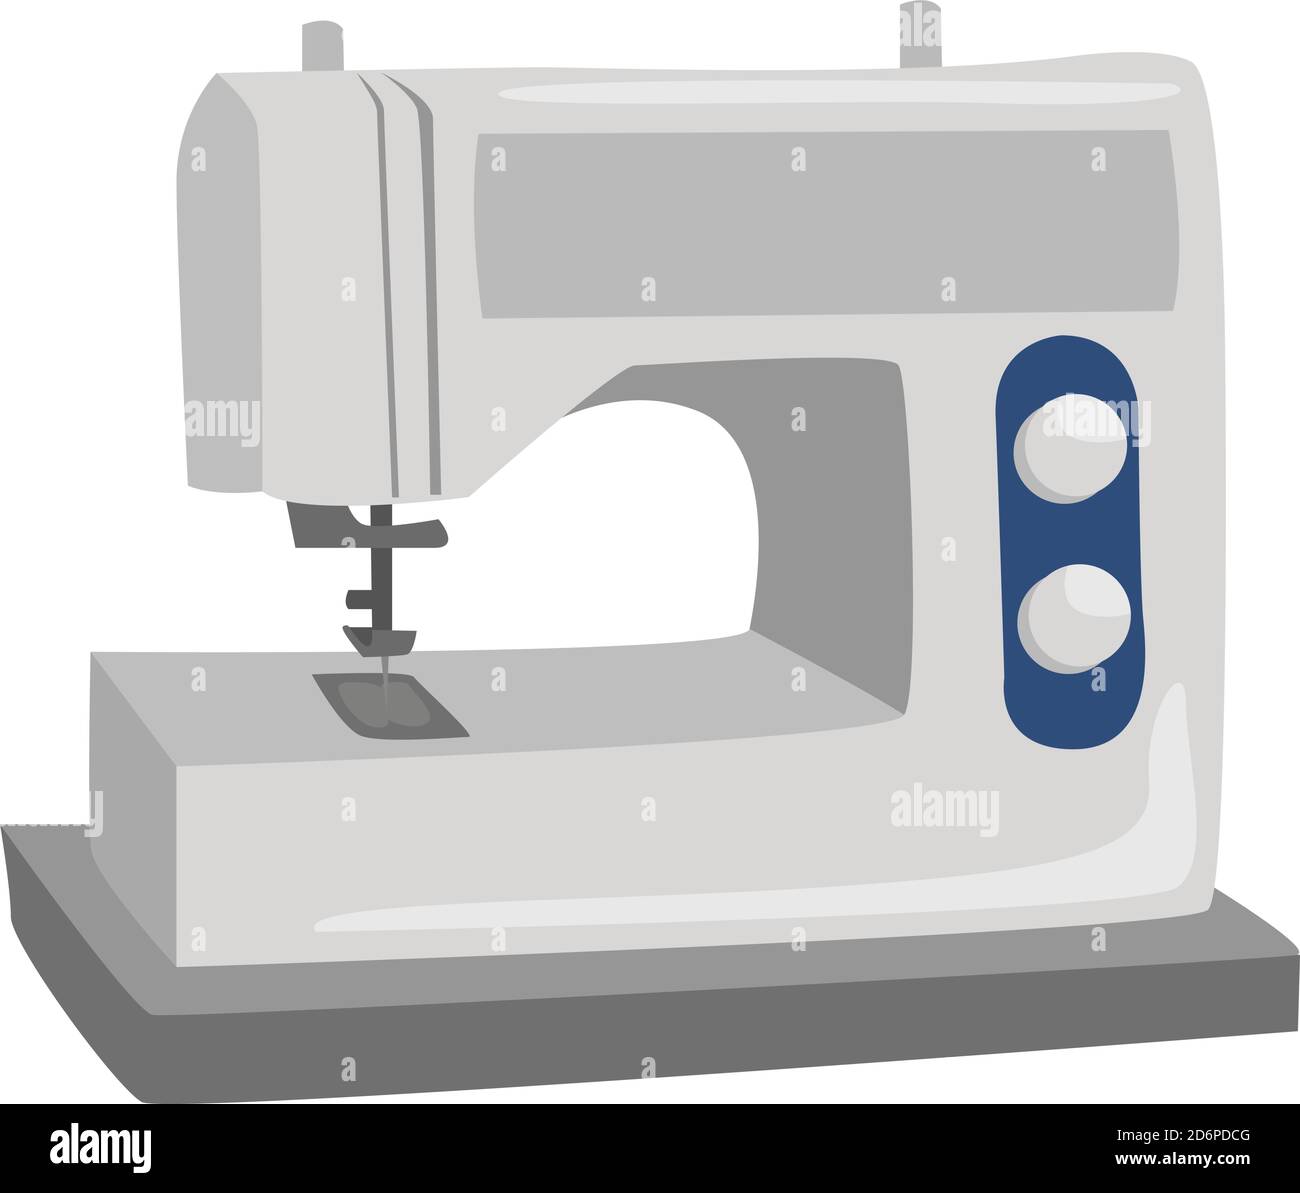 Sewing machine, illustration, vector on white background. Stock Vector